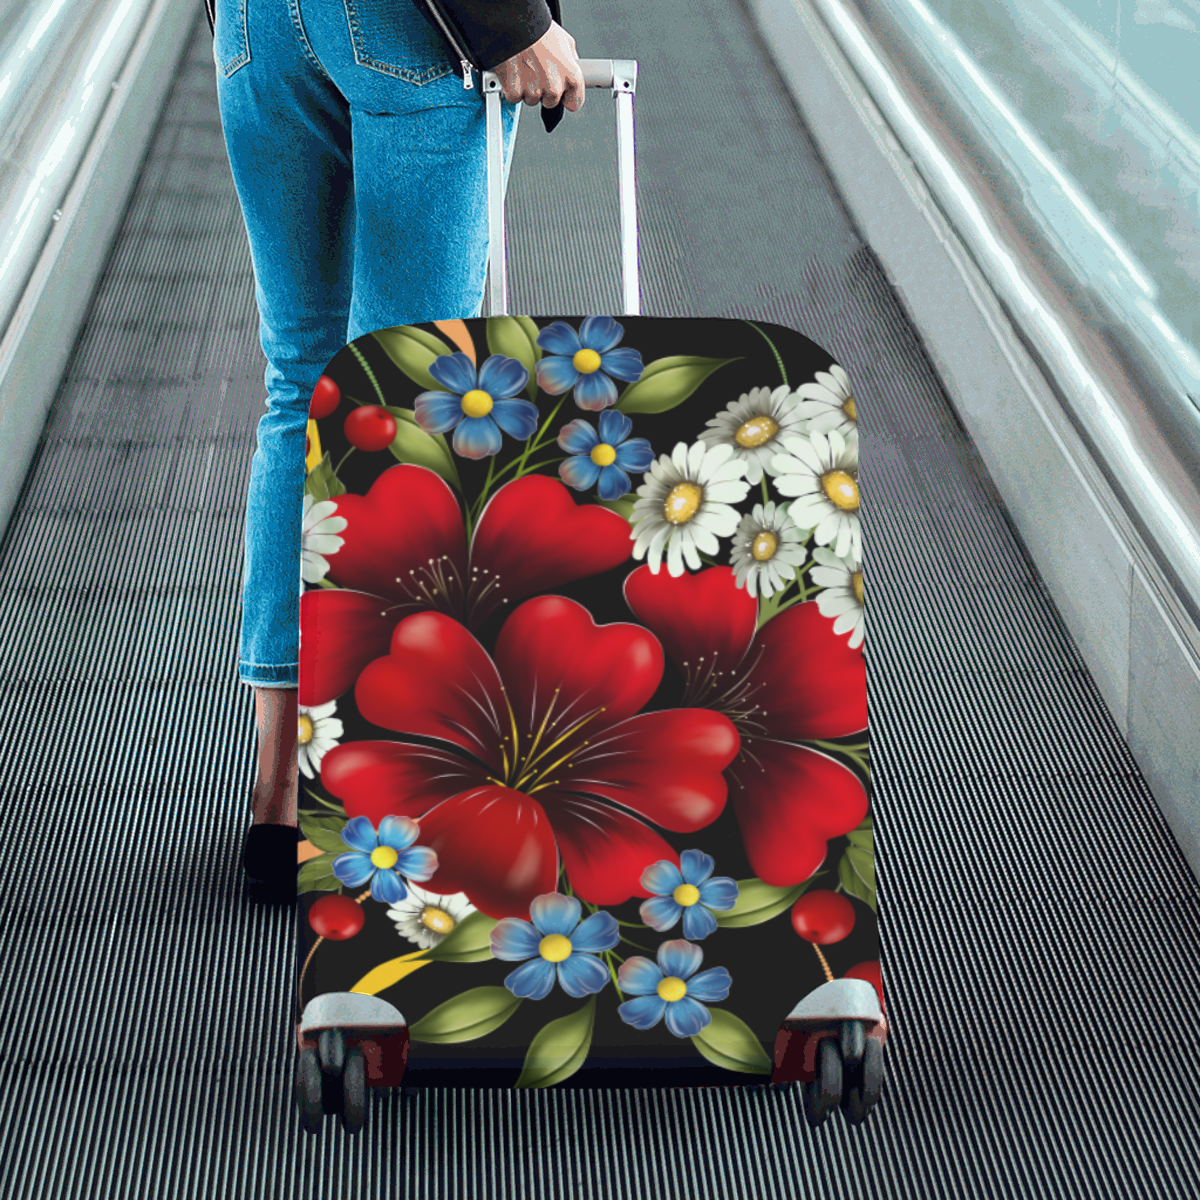 Bouquet Of Flowers Luggage Cover/Large 26"-28"